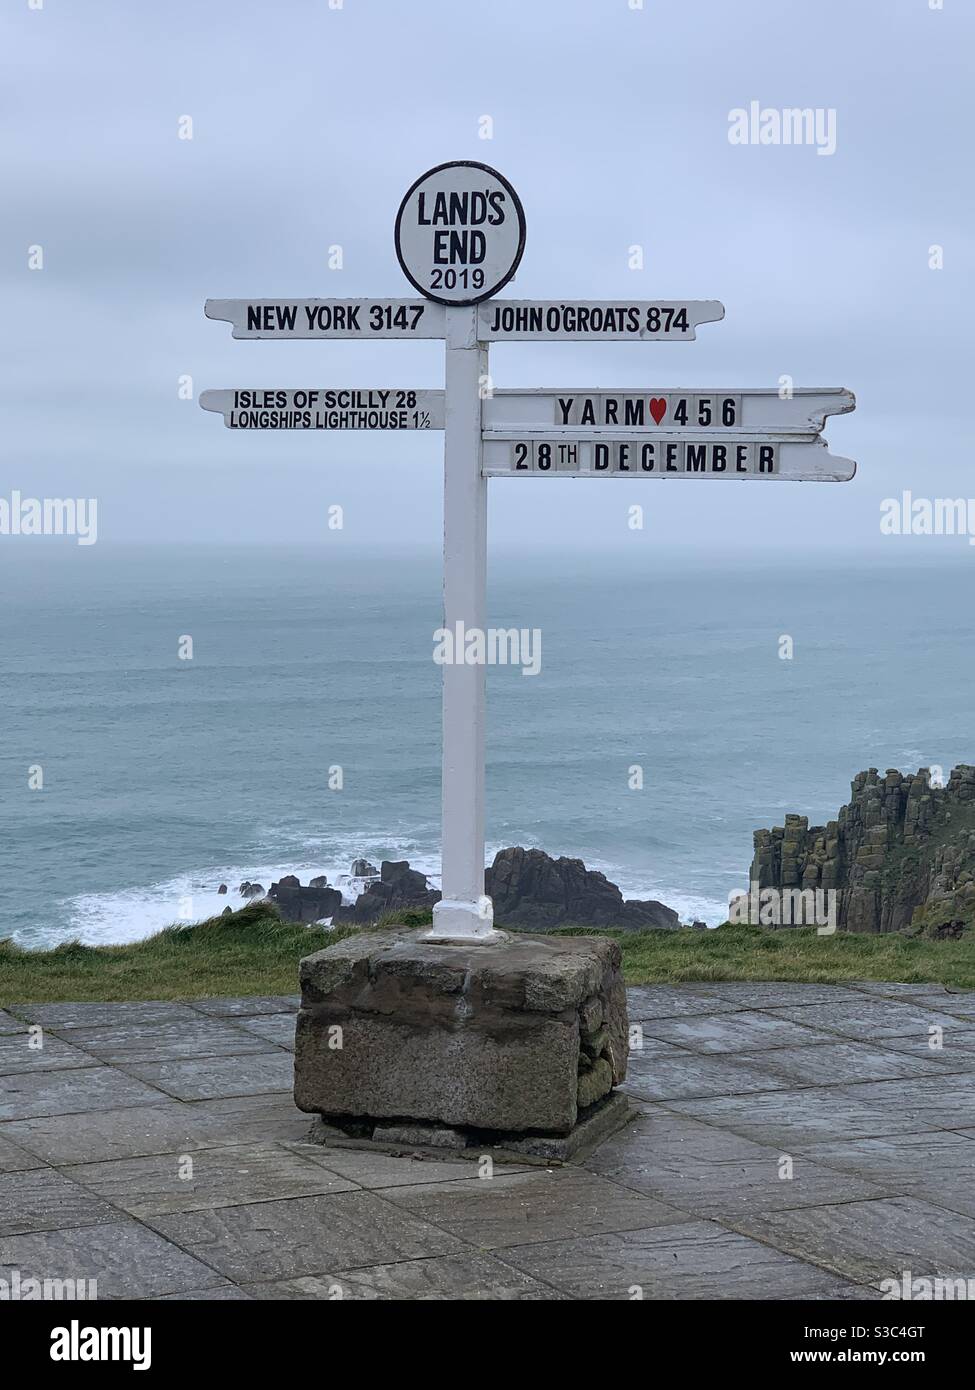 Lands End signpost showing distances to New York and John o’groats, Cornwall famous sign in England Stock Photo